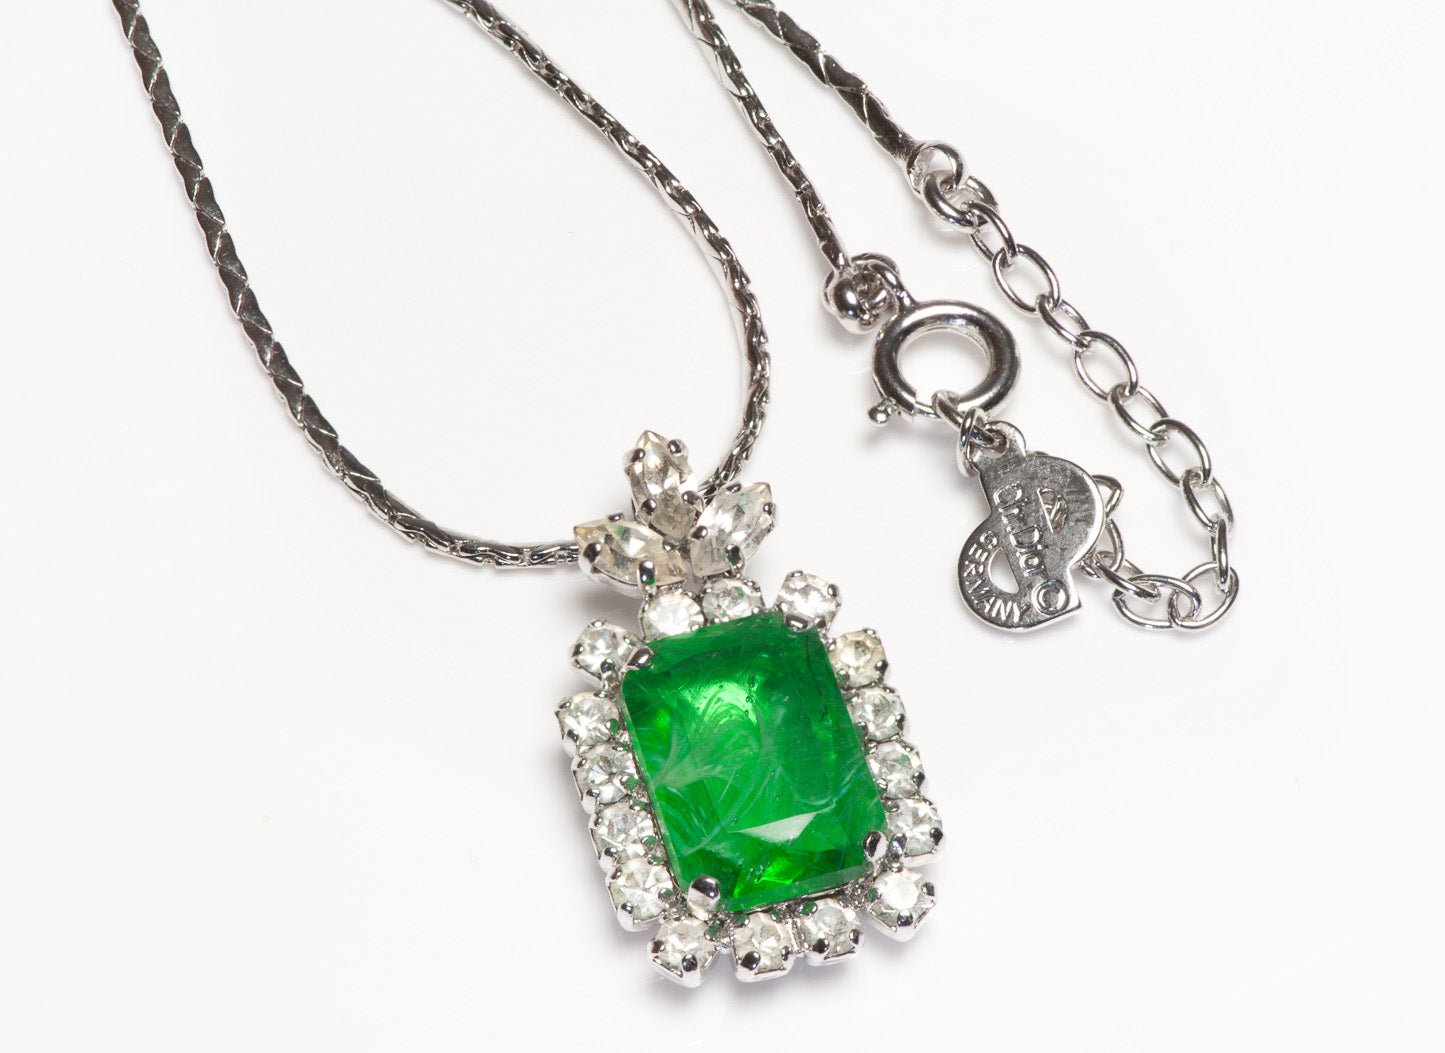 Christian Dior 1970’s Henkel & Grosse Green Crystal Chain Pendant Necklace